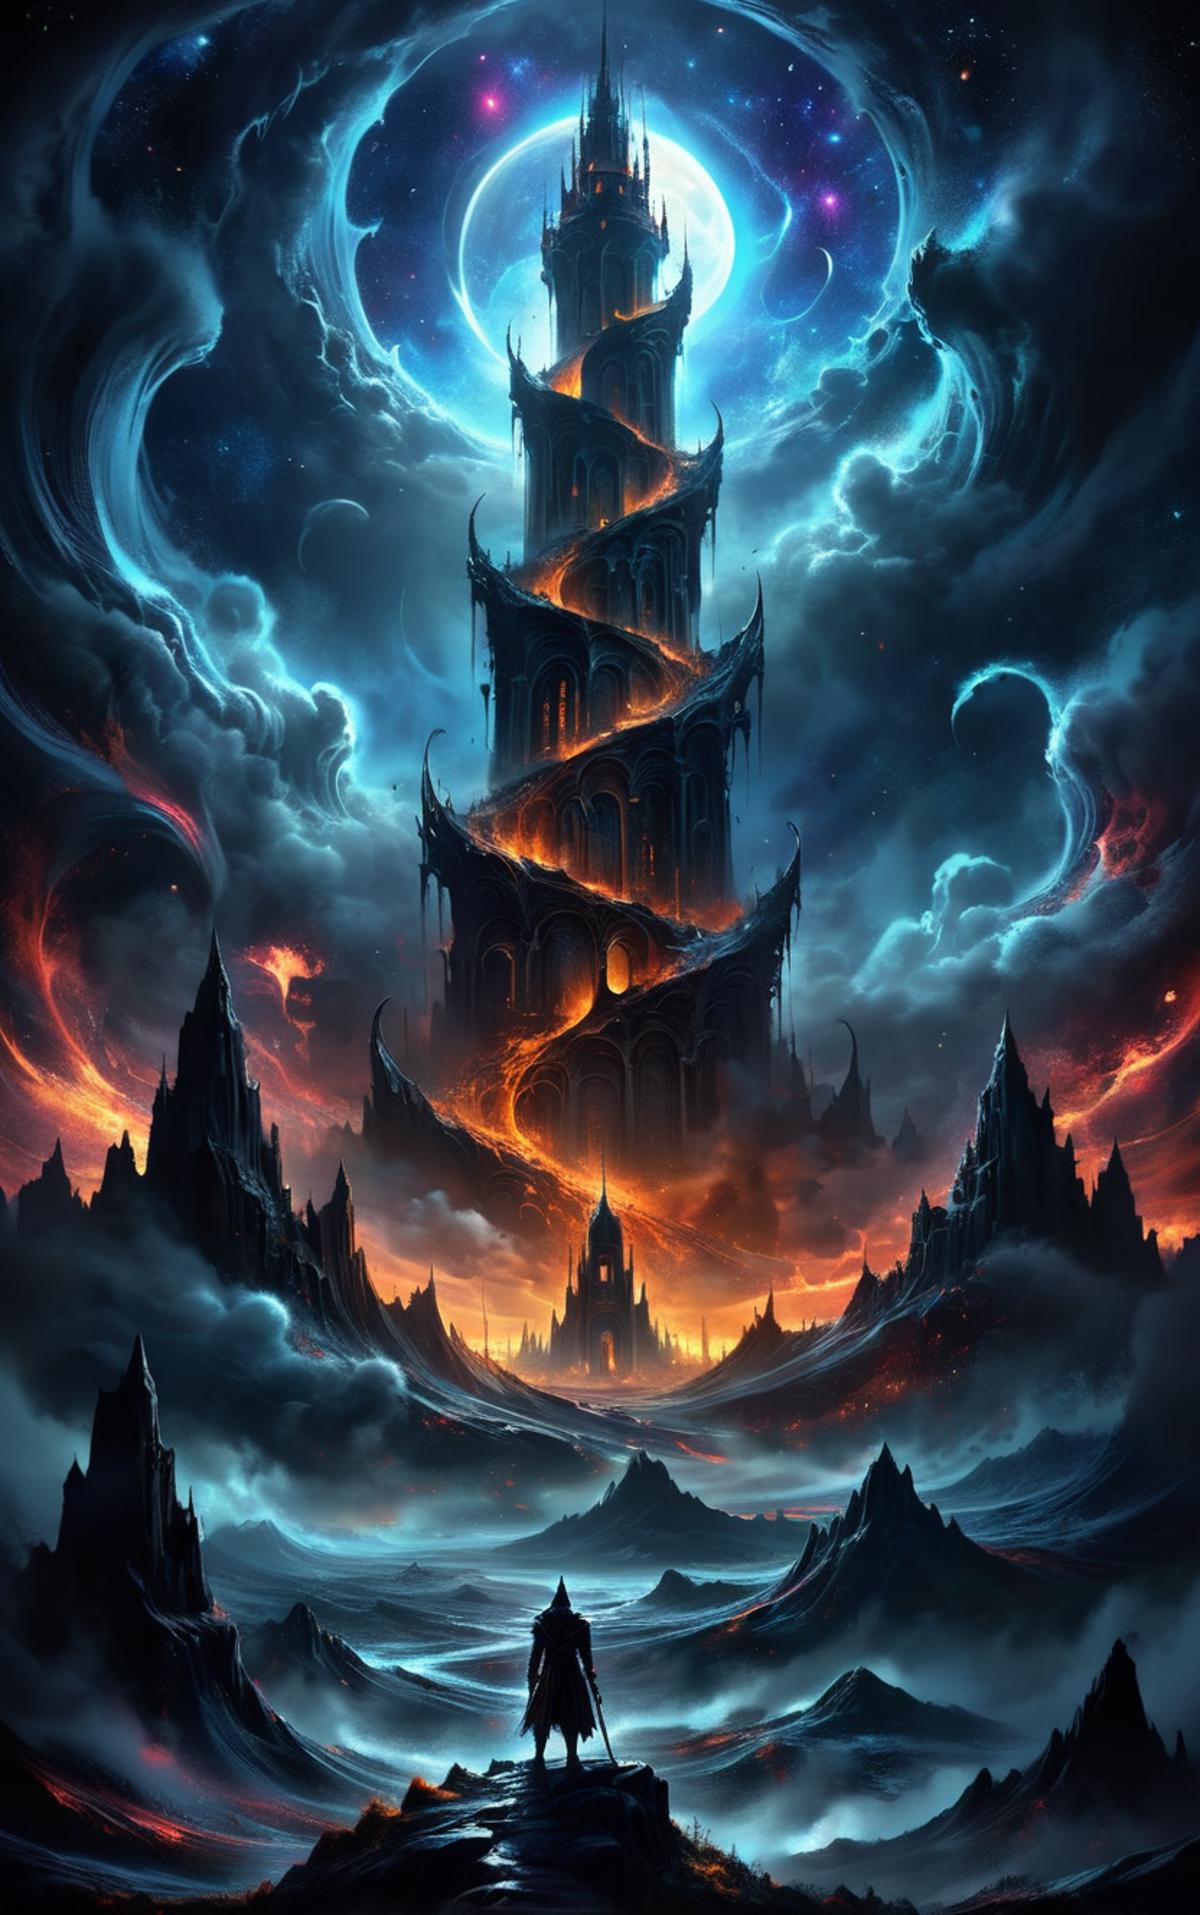 Illustration of a fantasy artwork featuring a large, multi-layered tower with a spiral staircase and a cloudy sky.